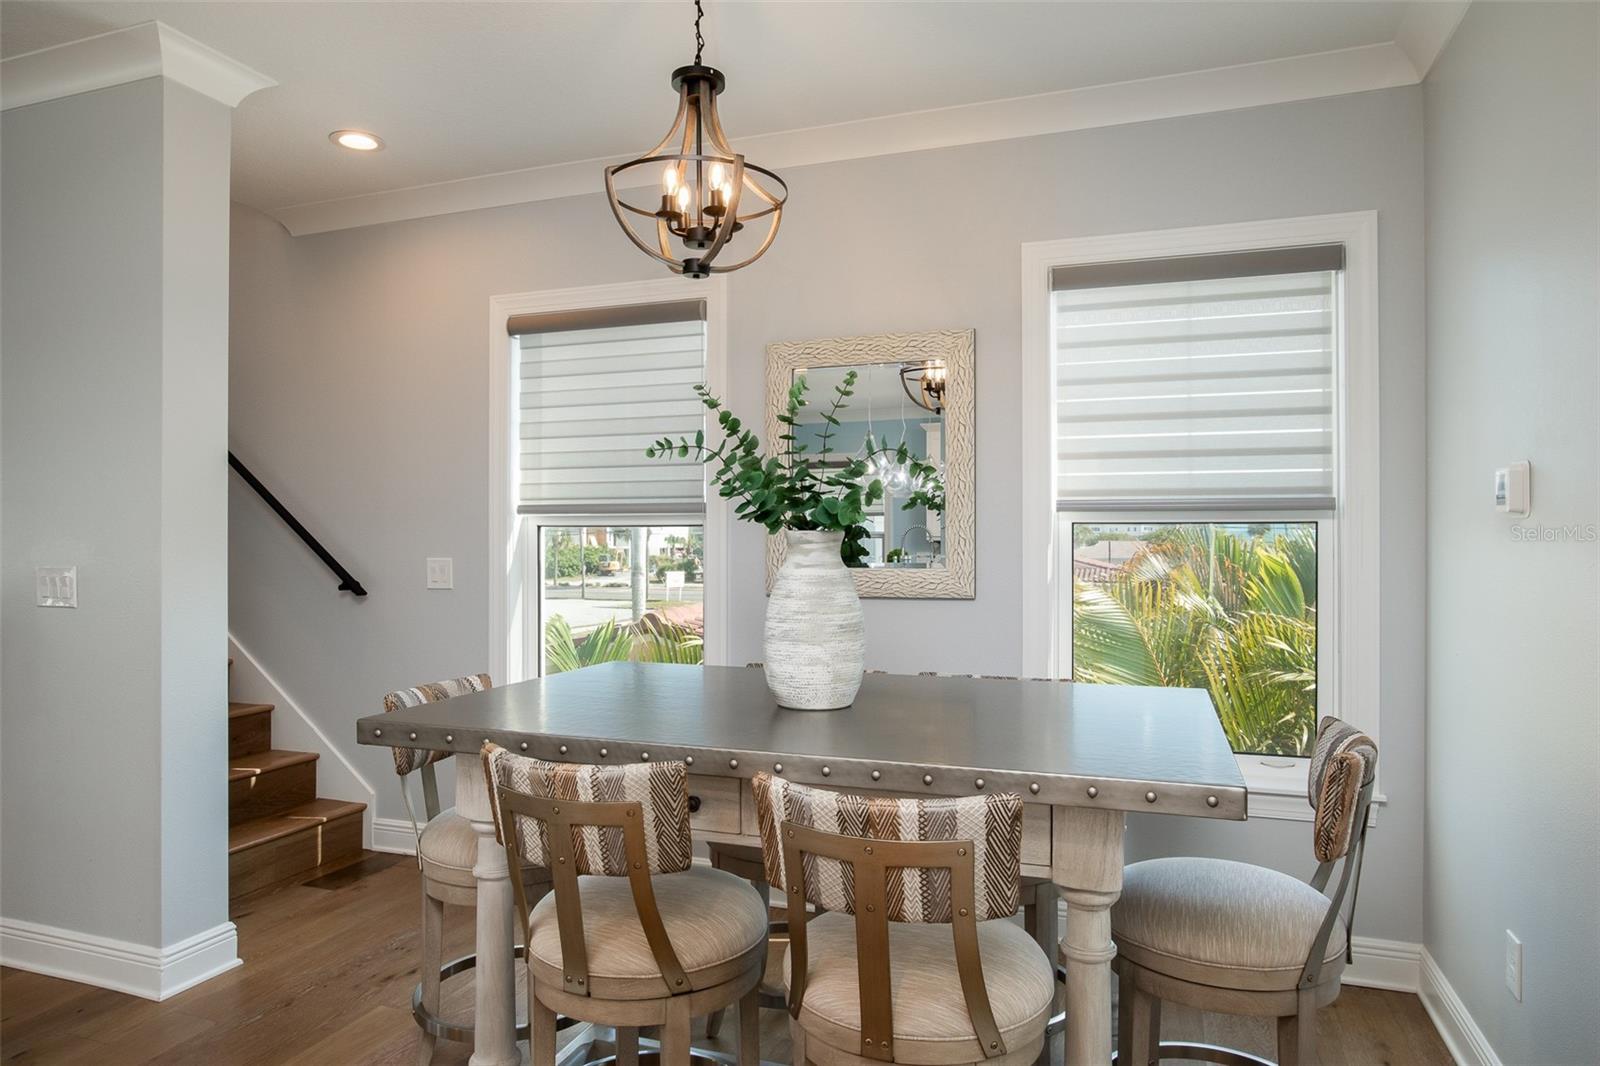 The dining area provides the perfect setting to converse and connect, surrounded by the tranquil ambiance of coastal living, fostering memorable moments and heartfelt conversations.